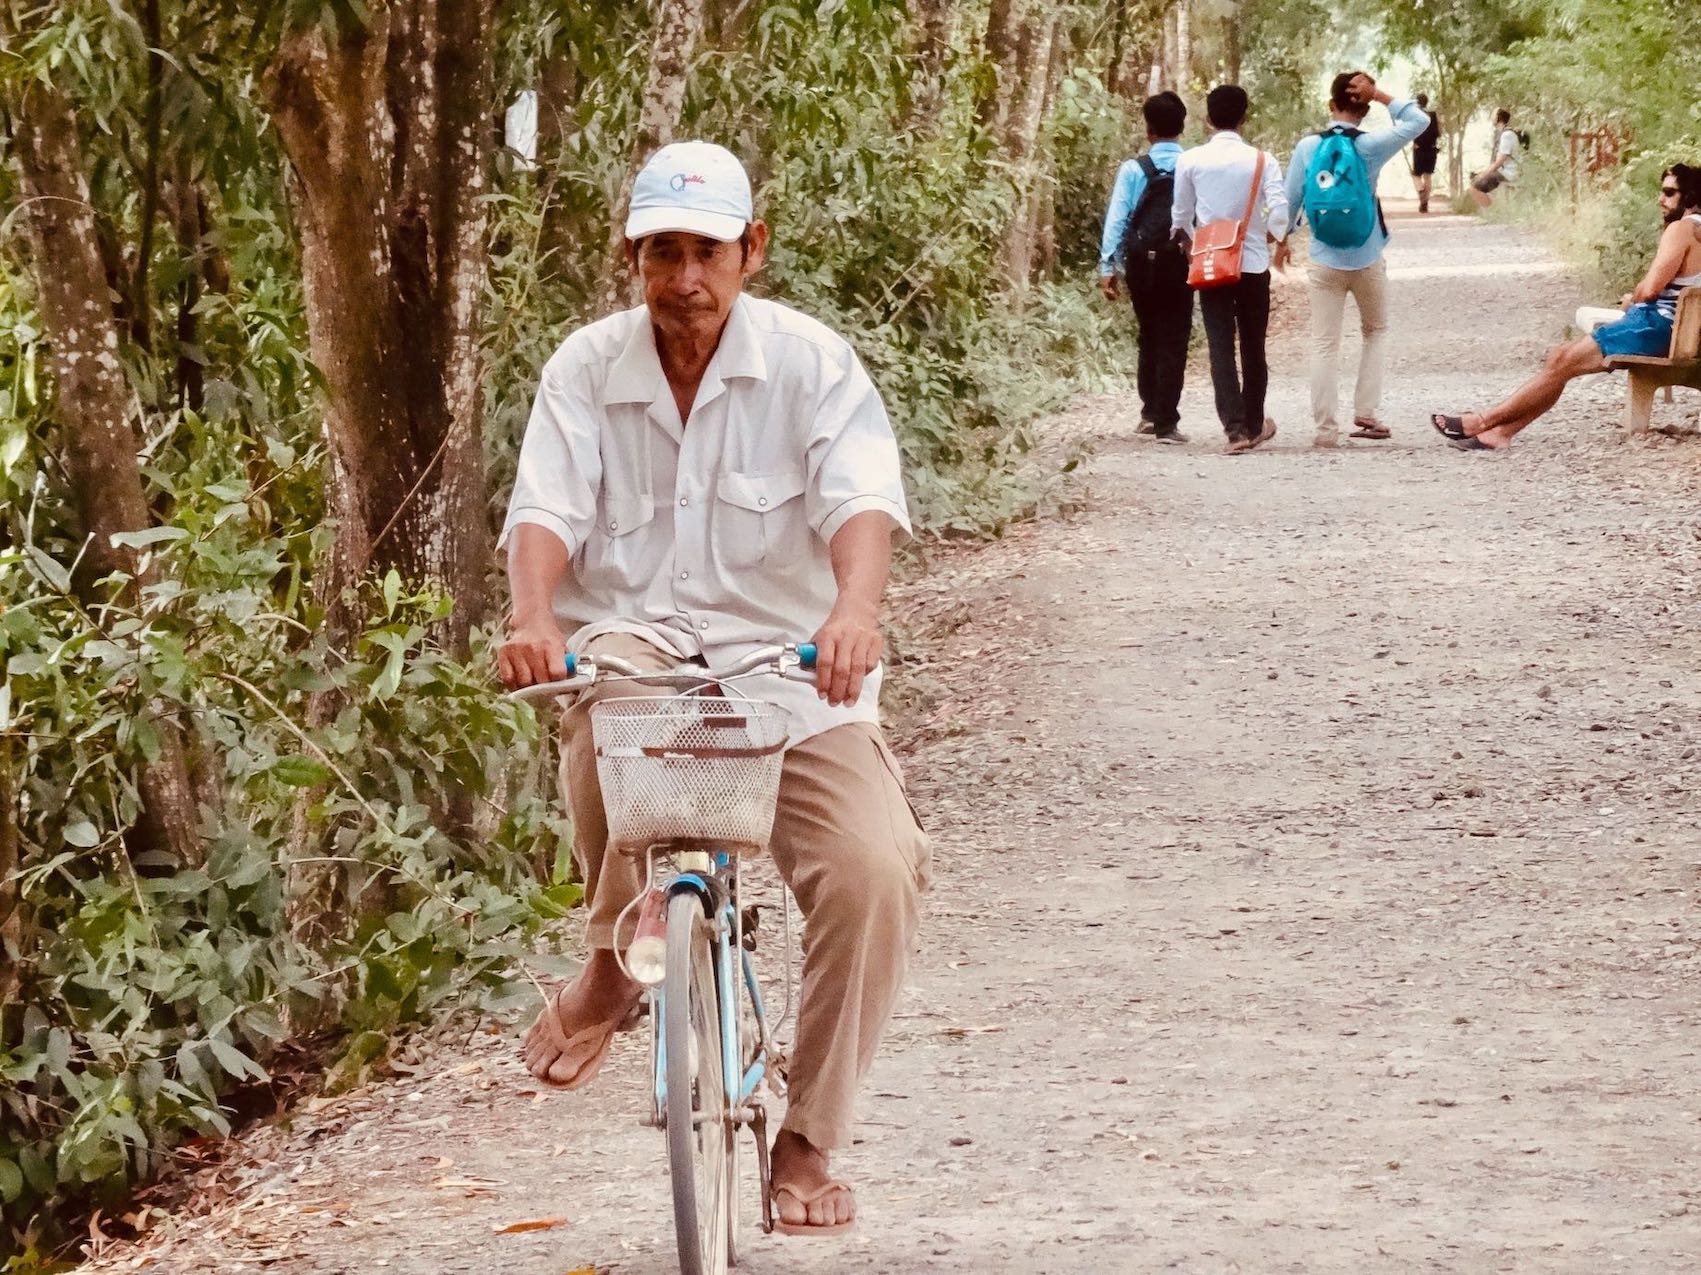 The nature trail at Cambodia's Killing Fields